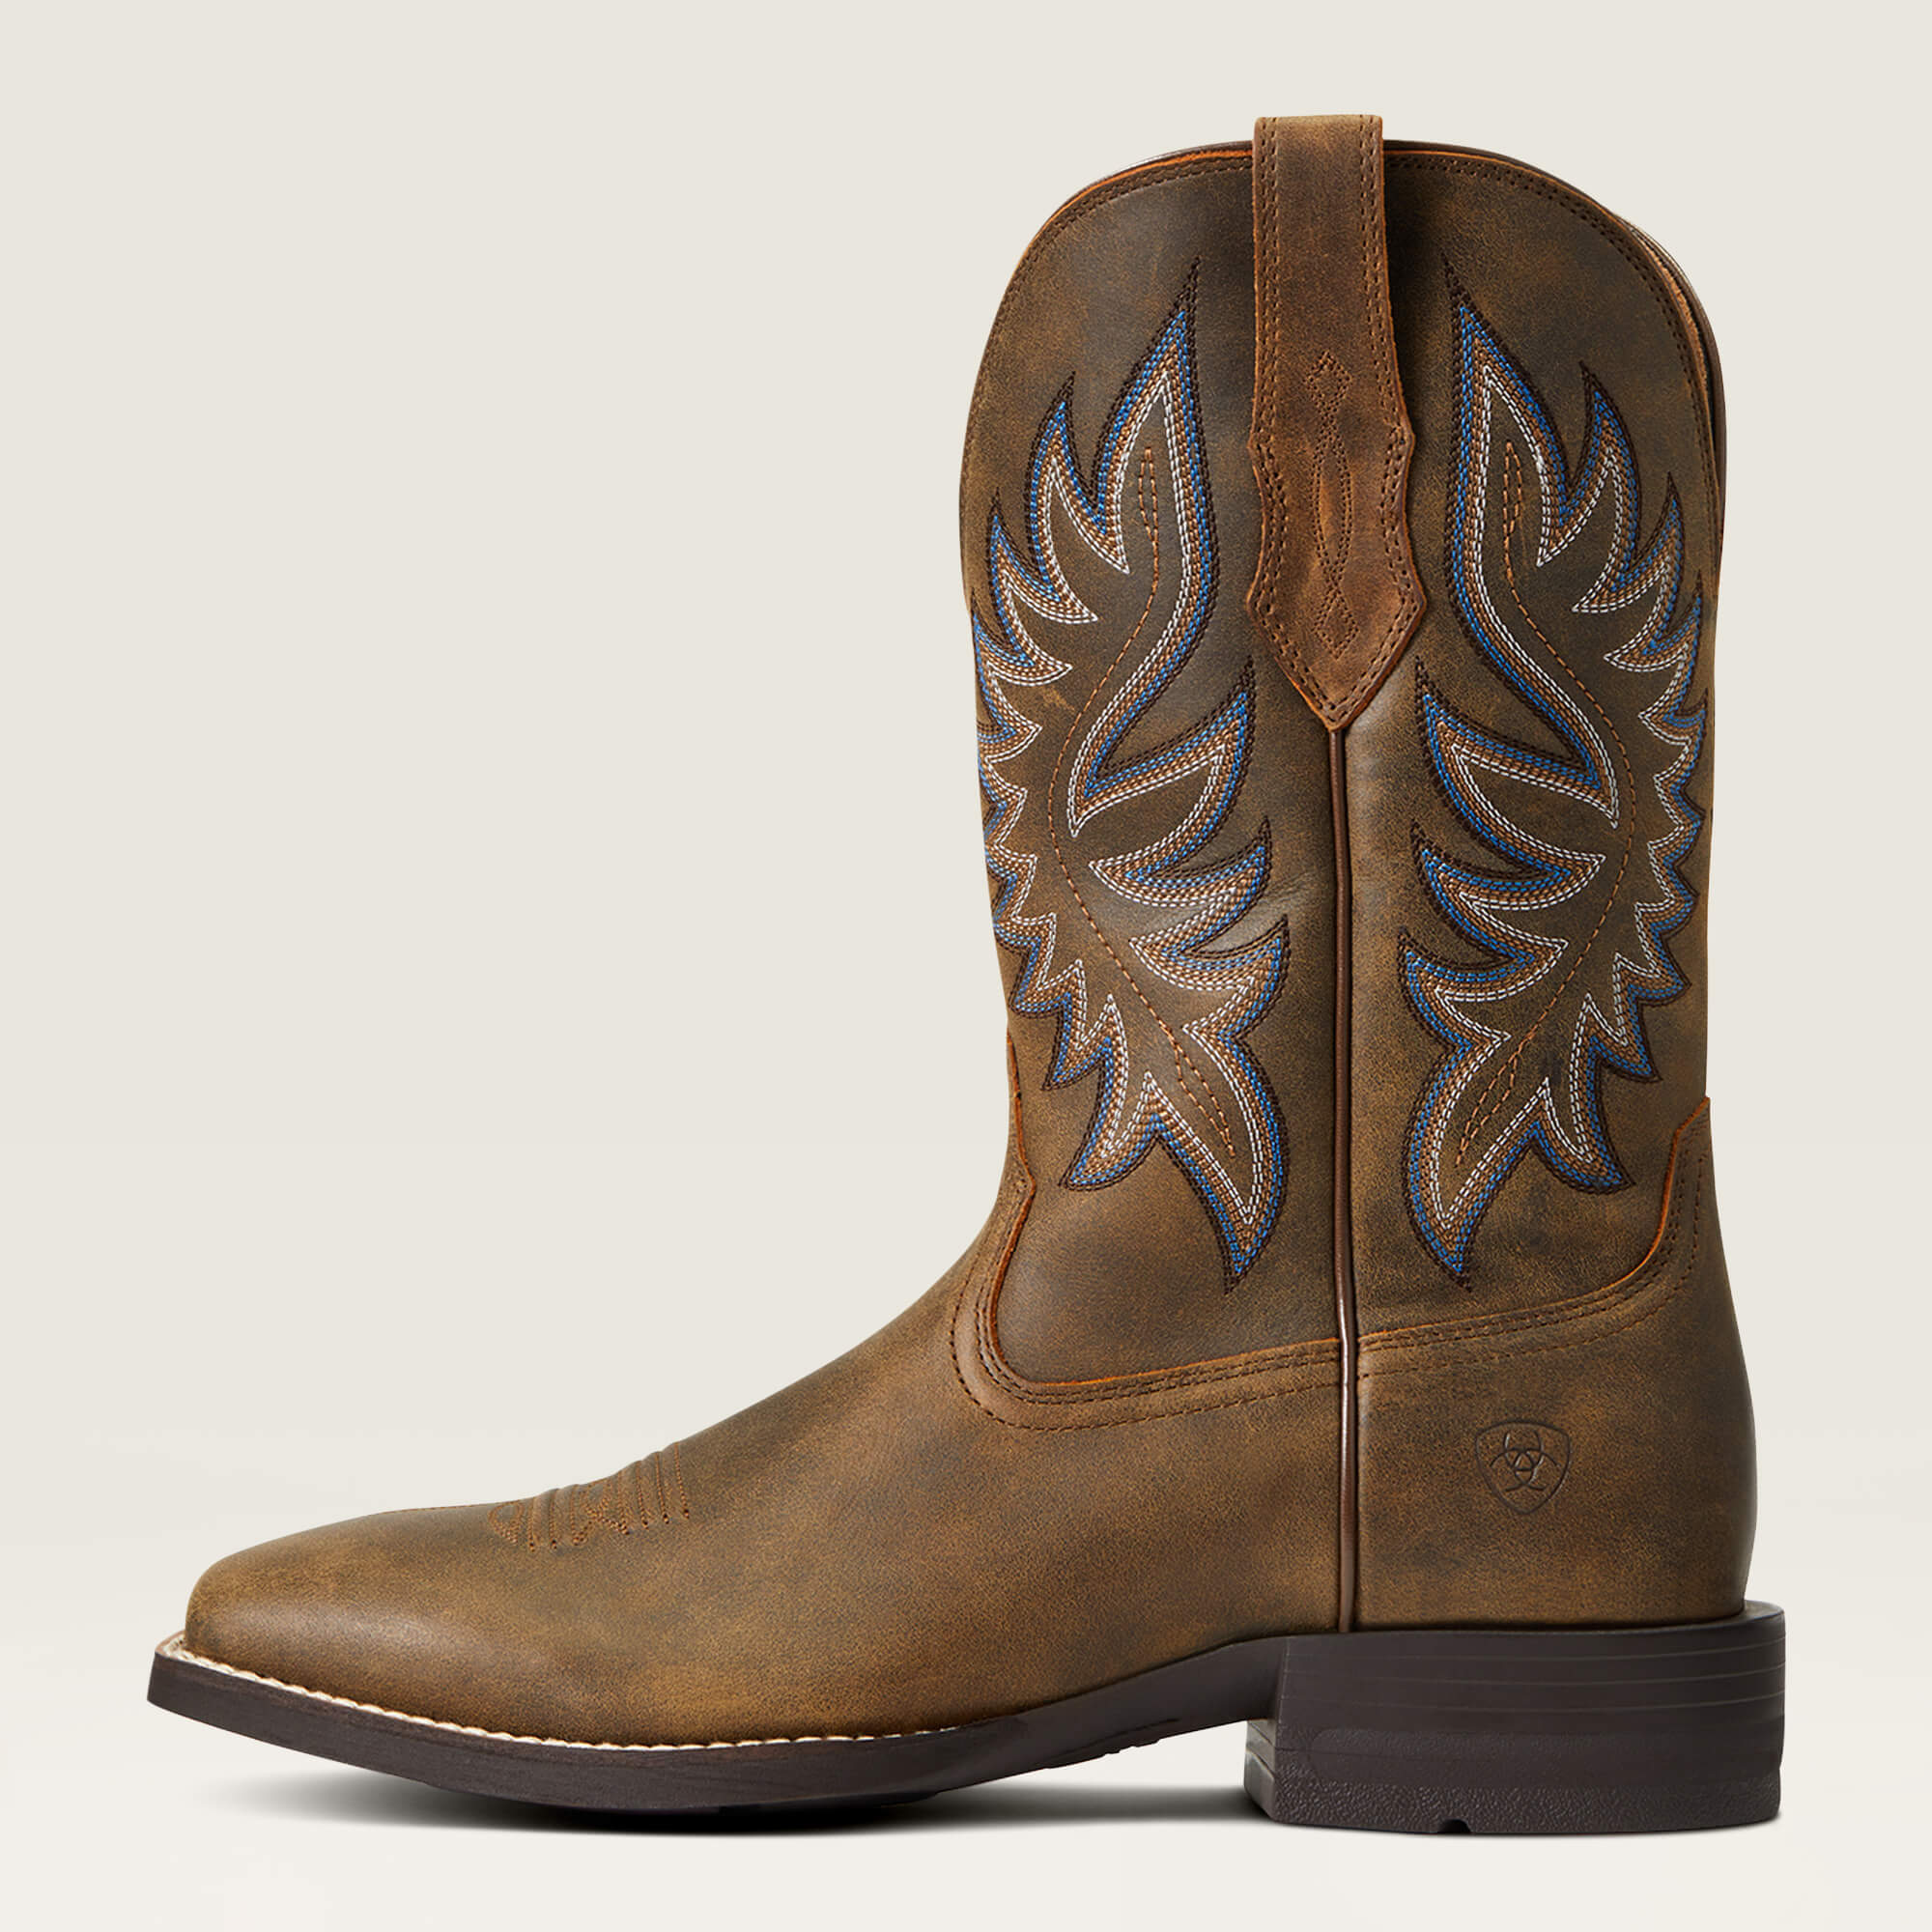 Product Name: Ariat Men's Arena Rebound Western Boots